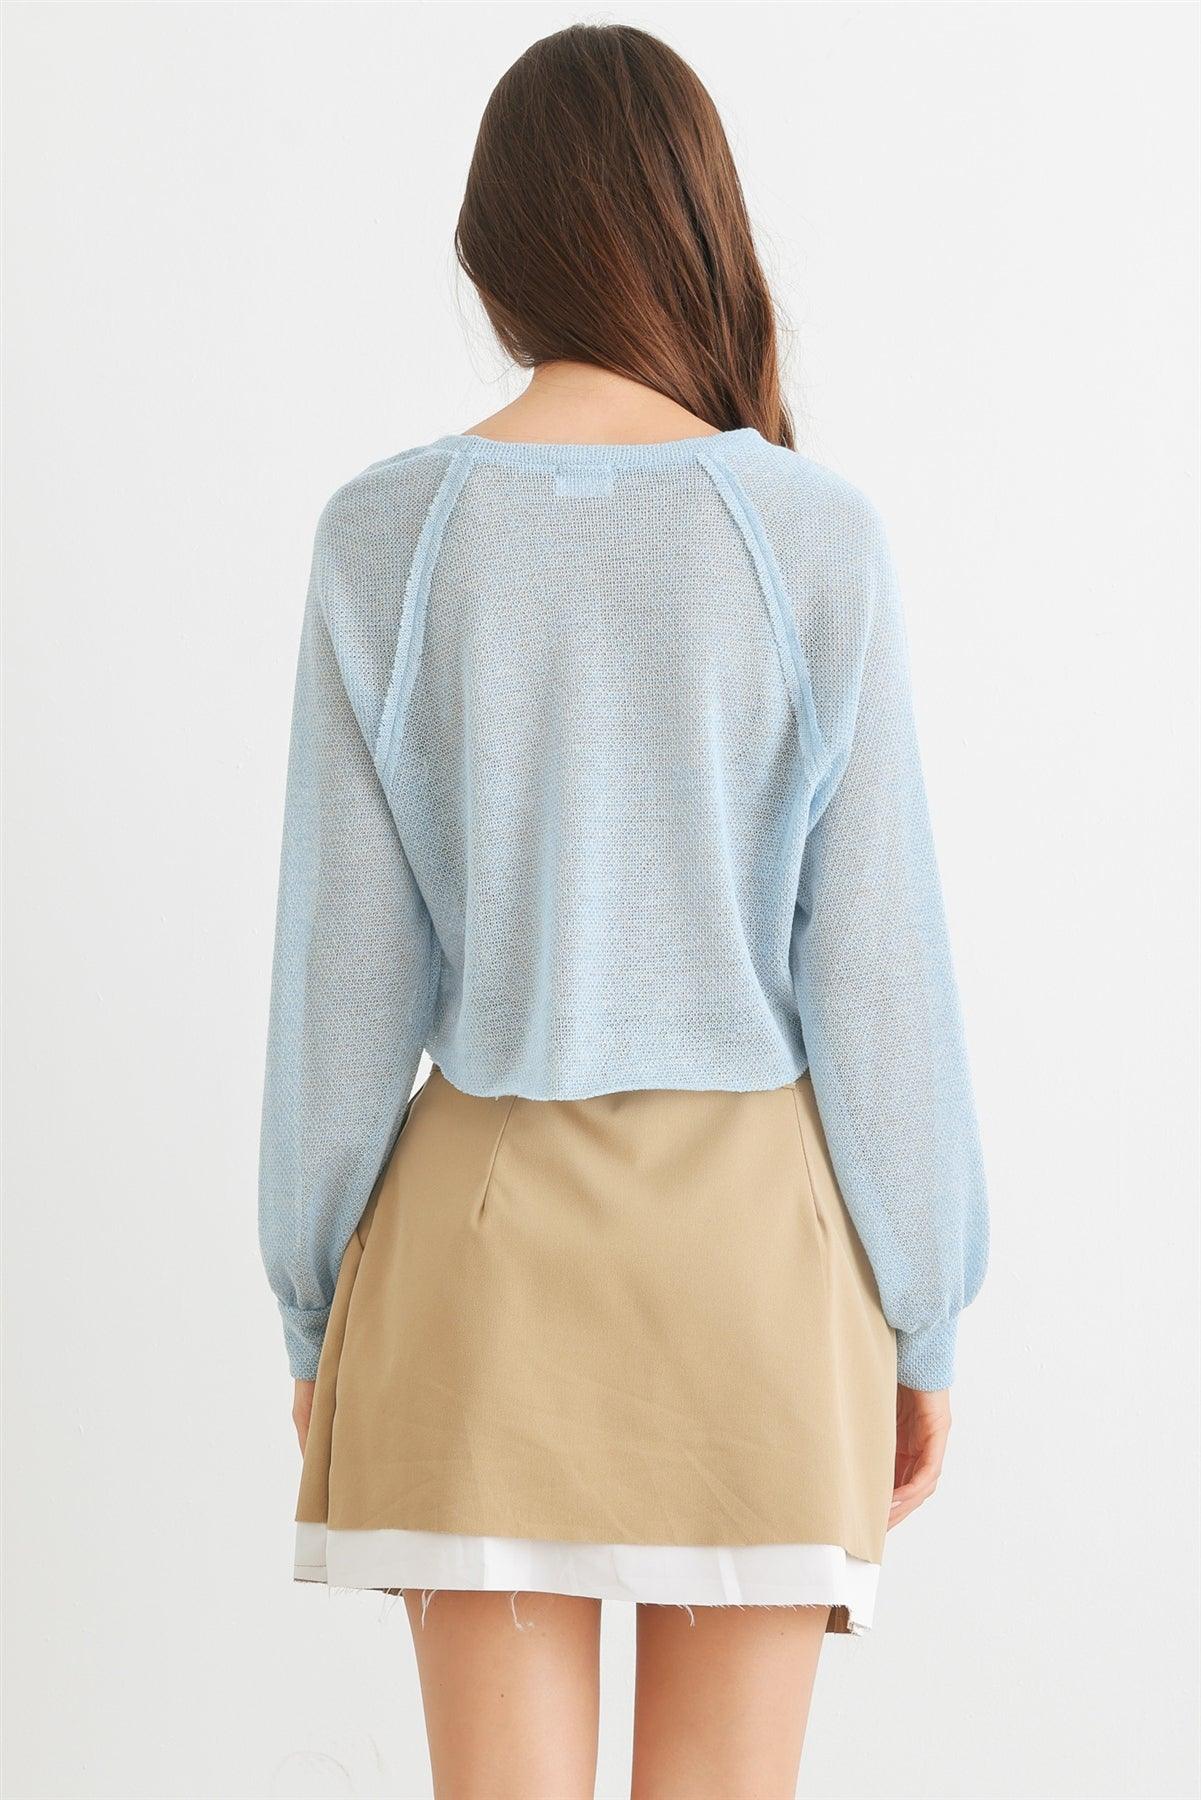 Blue Knit Long Sleeve Round Neck Crop Top /1-2-2-1